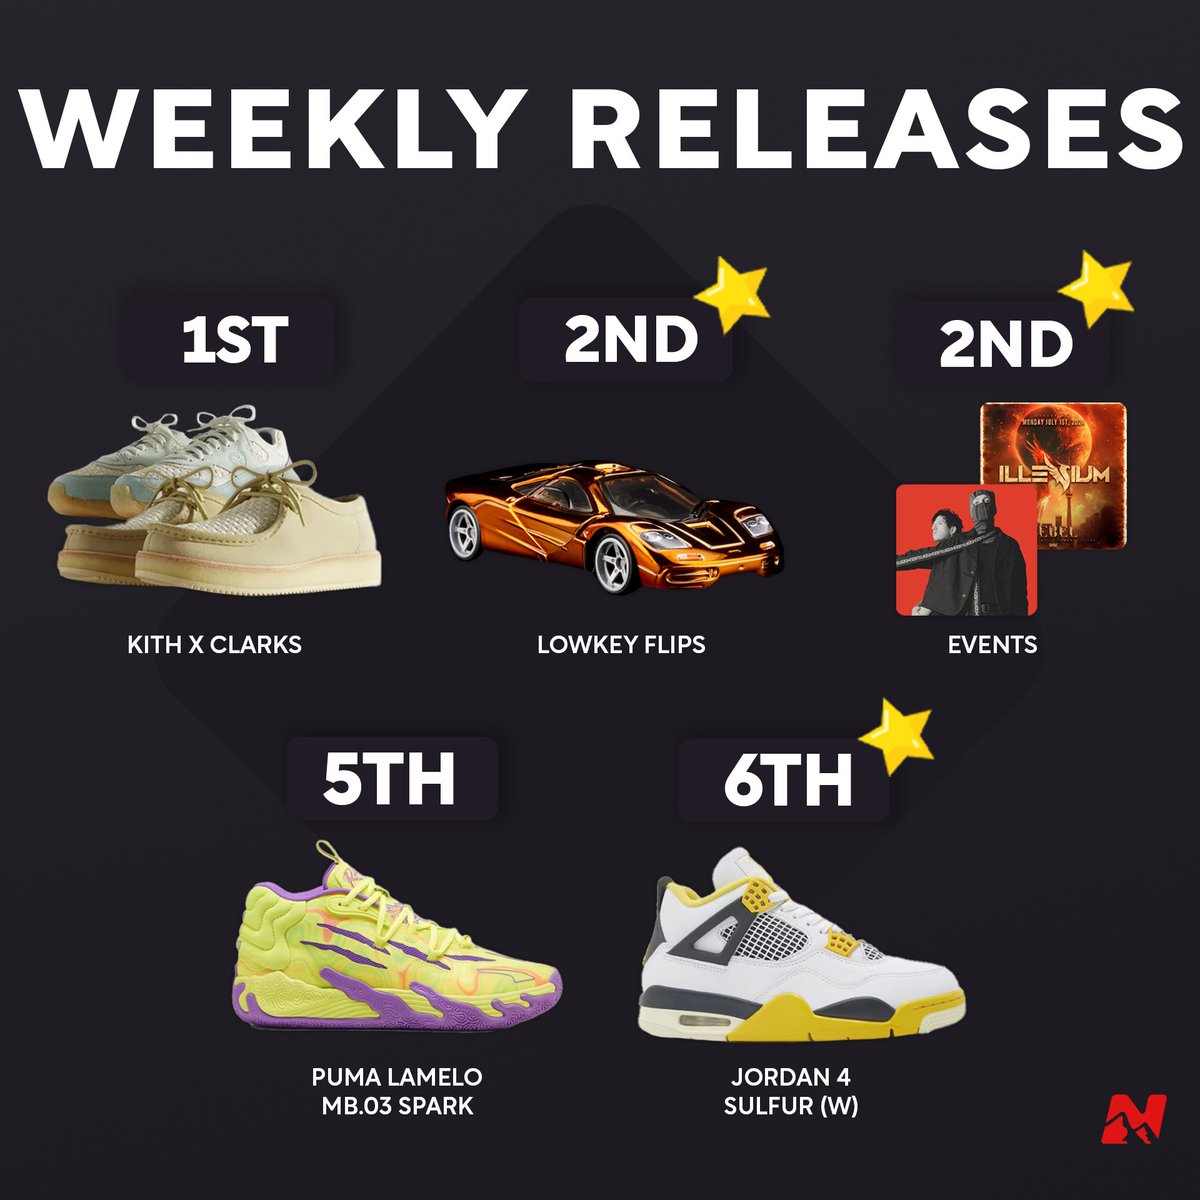 Your Weekly Releases are here! Not a bad week - flips - ticekts and 4s. What are you copping?